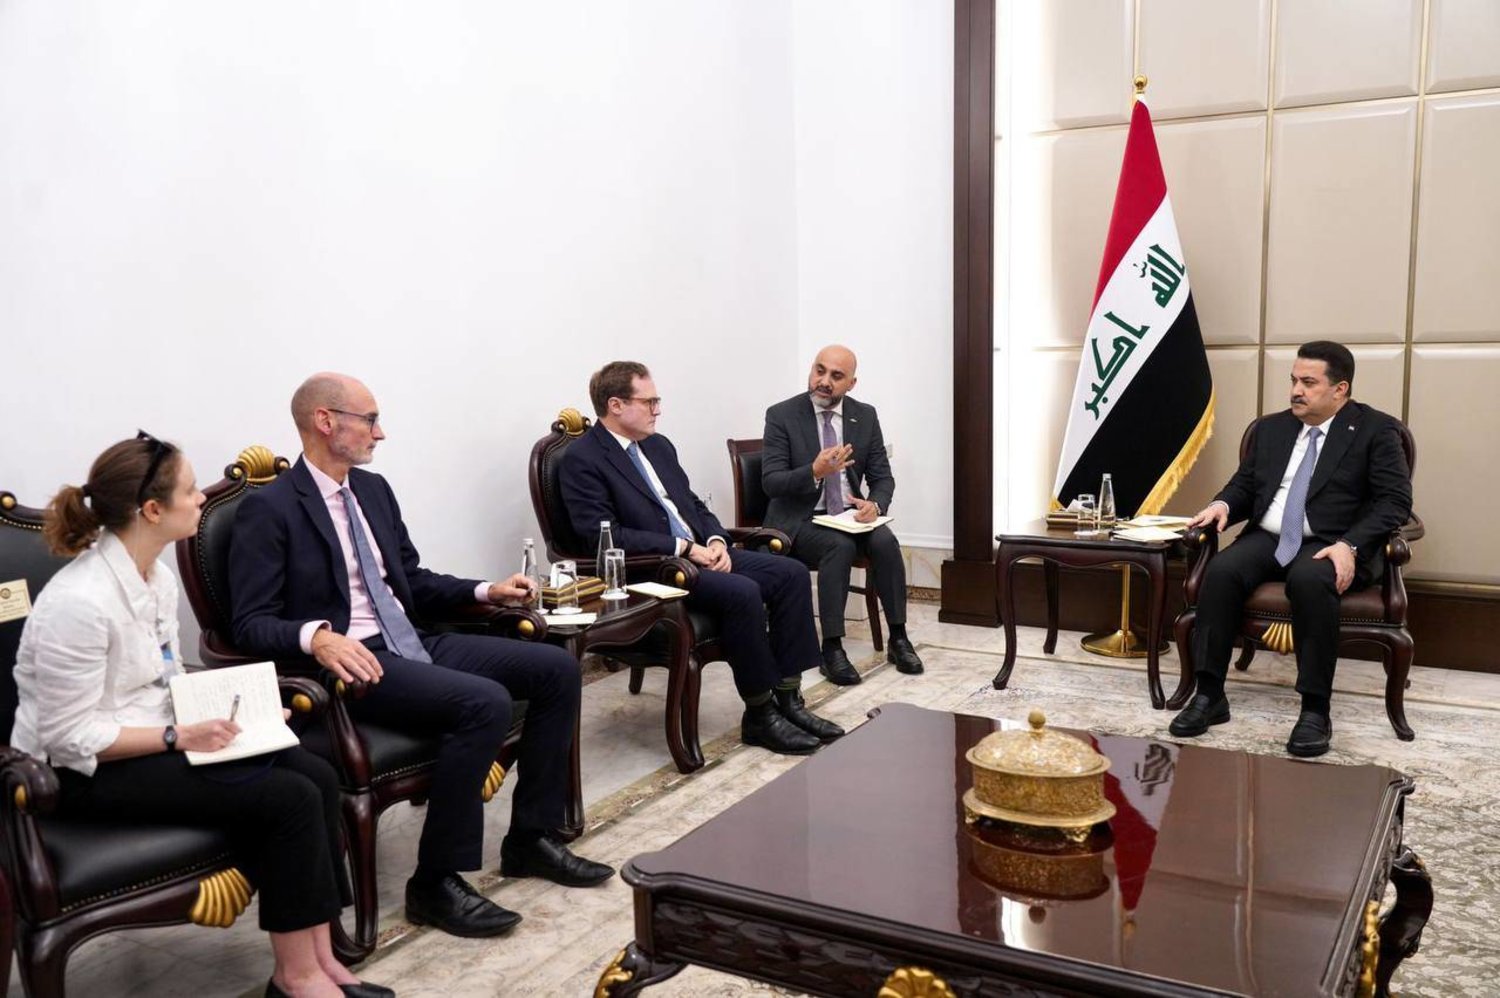 Motives for Enhancing Security Cooperation Between Iraq and Britain